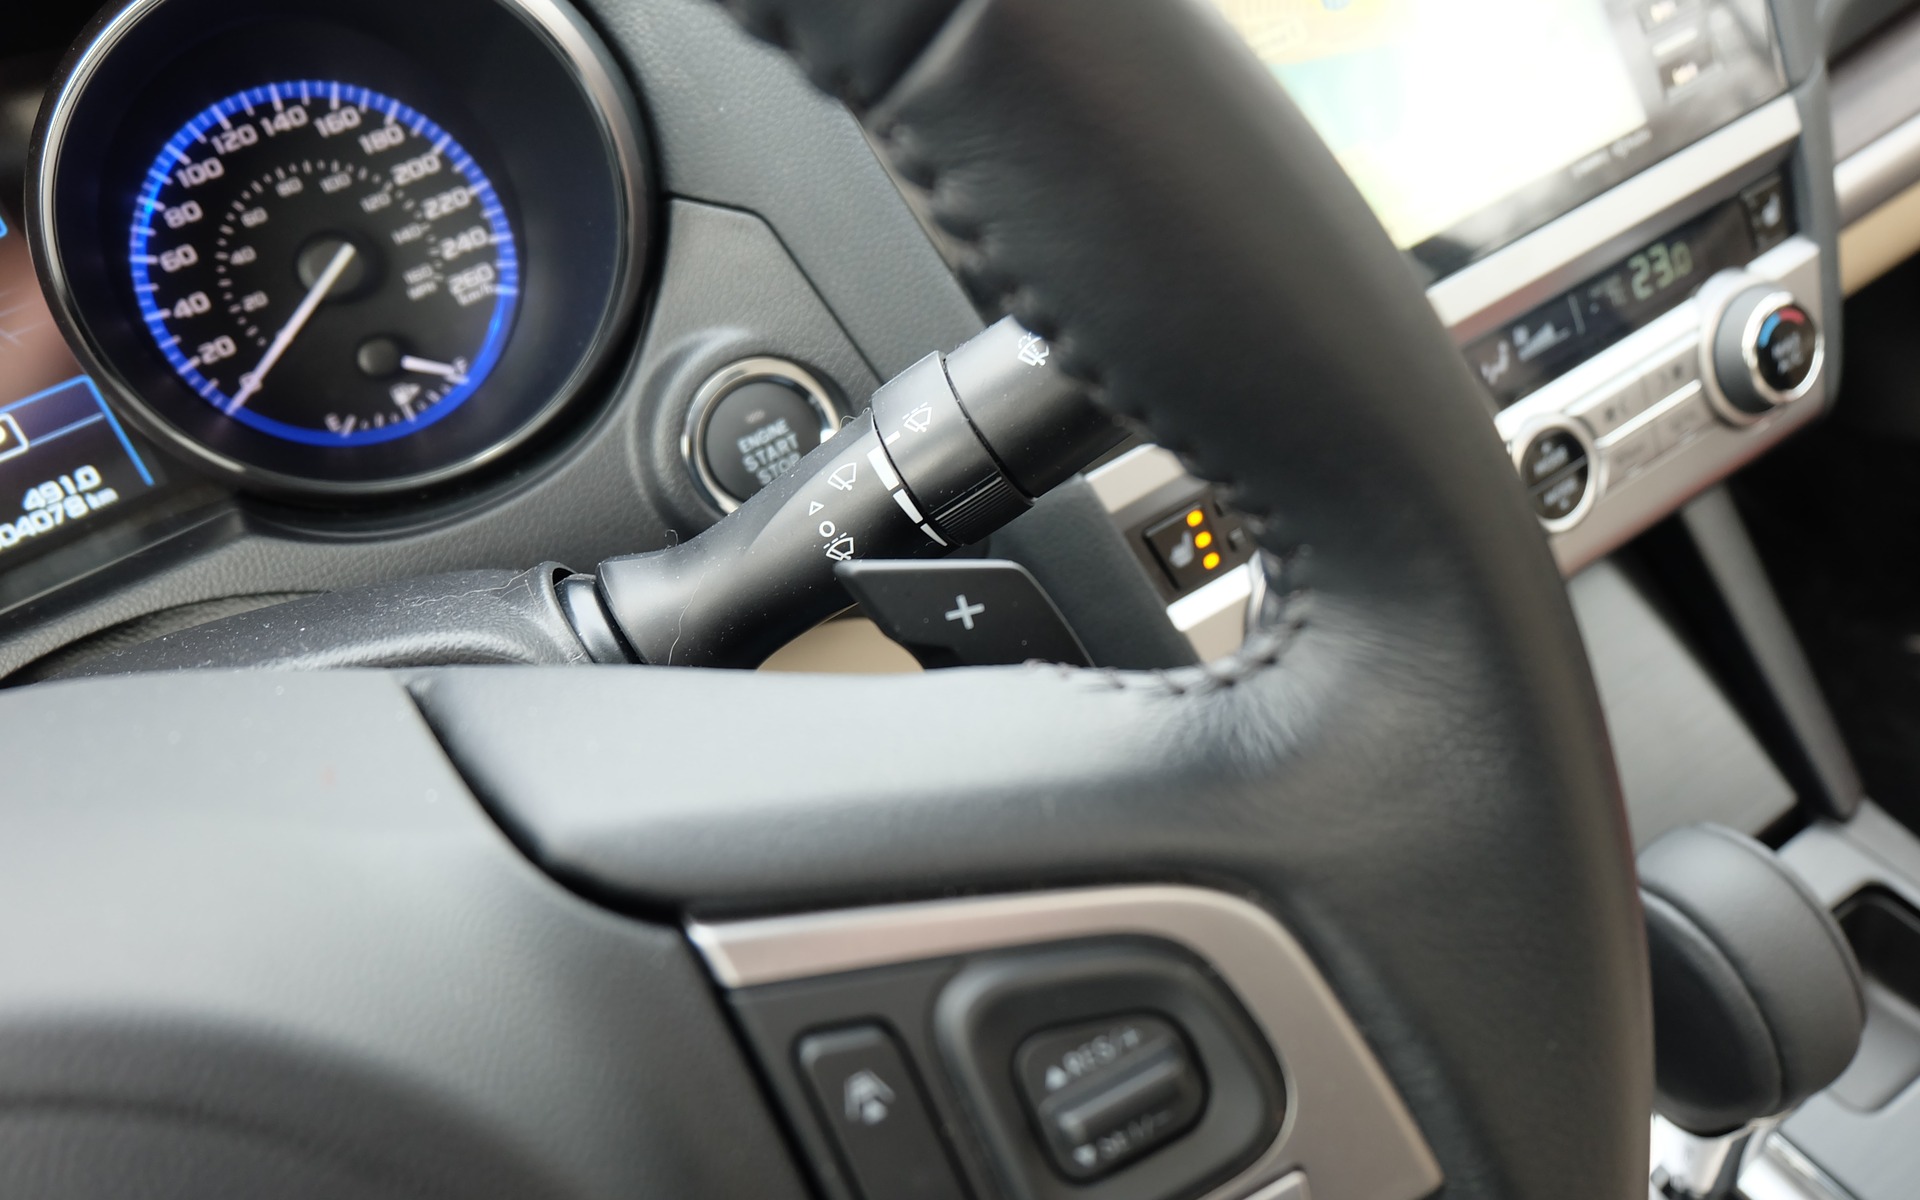 The column-mounted paddles trigger simulated "gears" in the CVT.